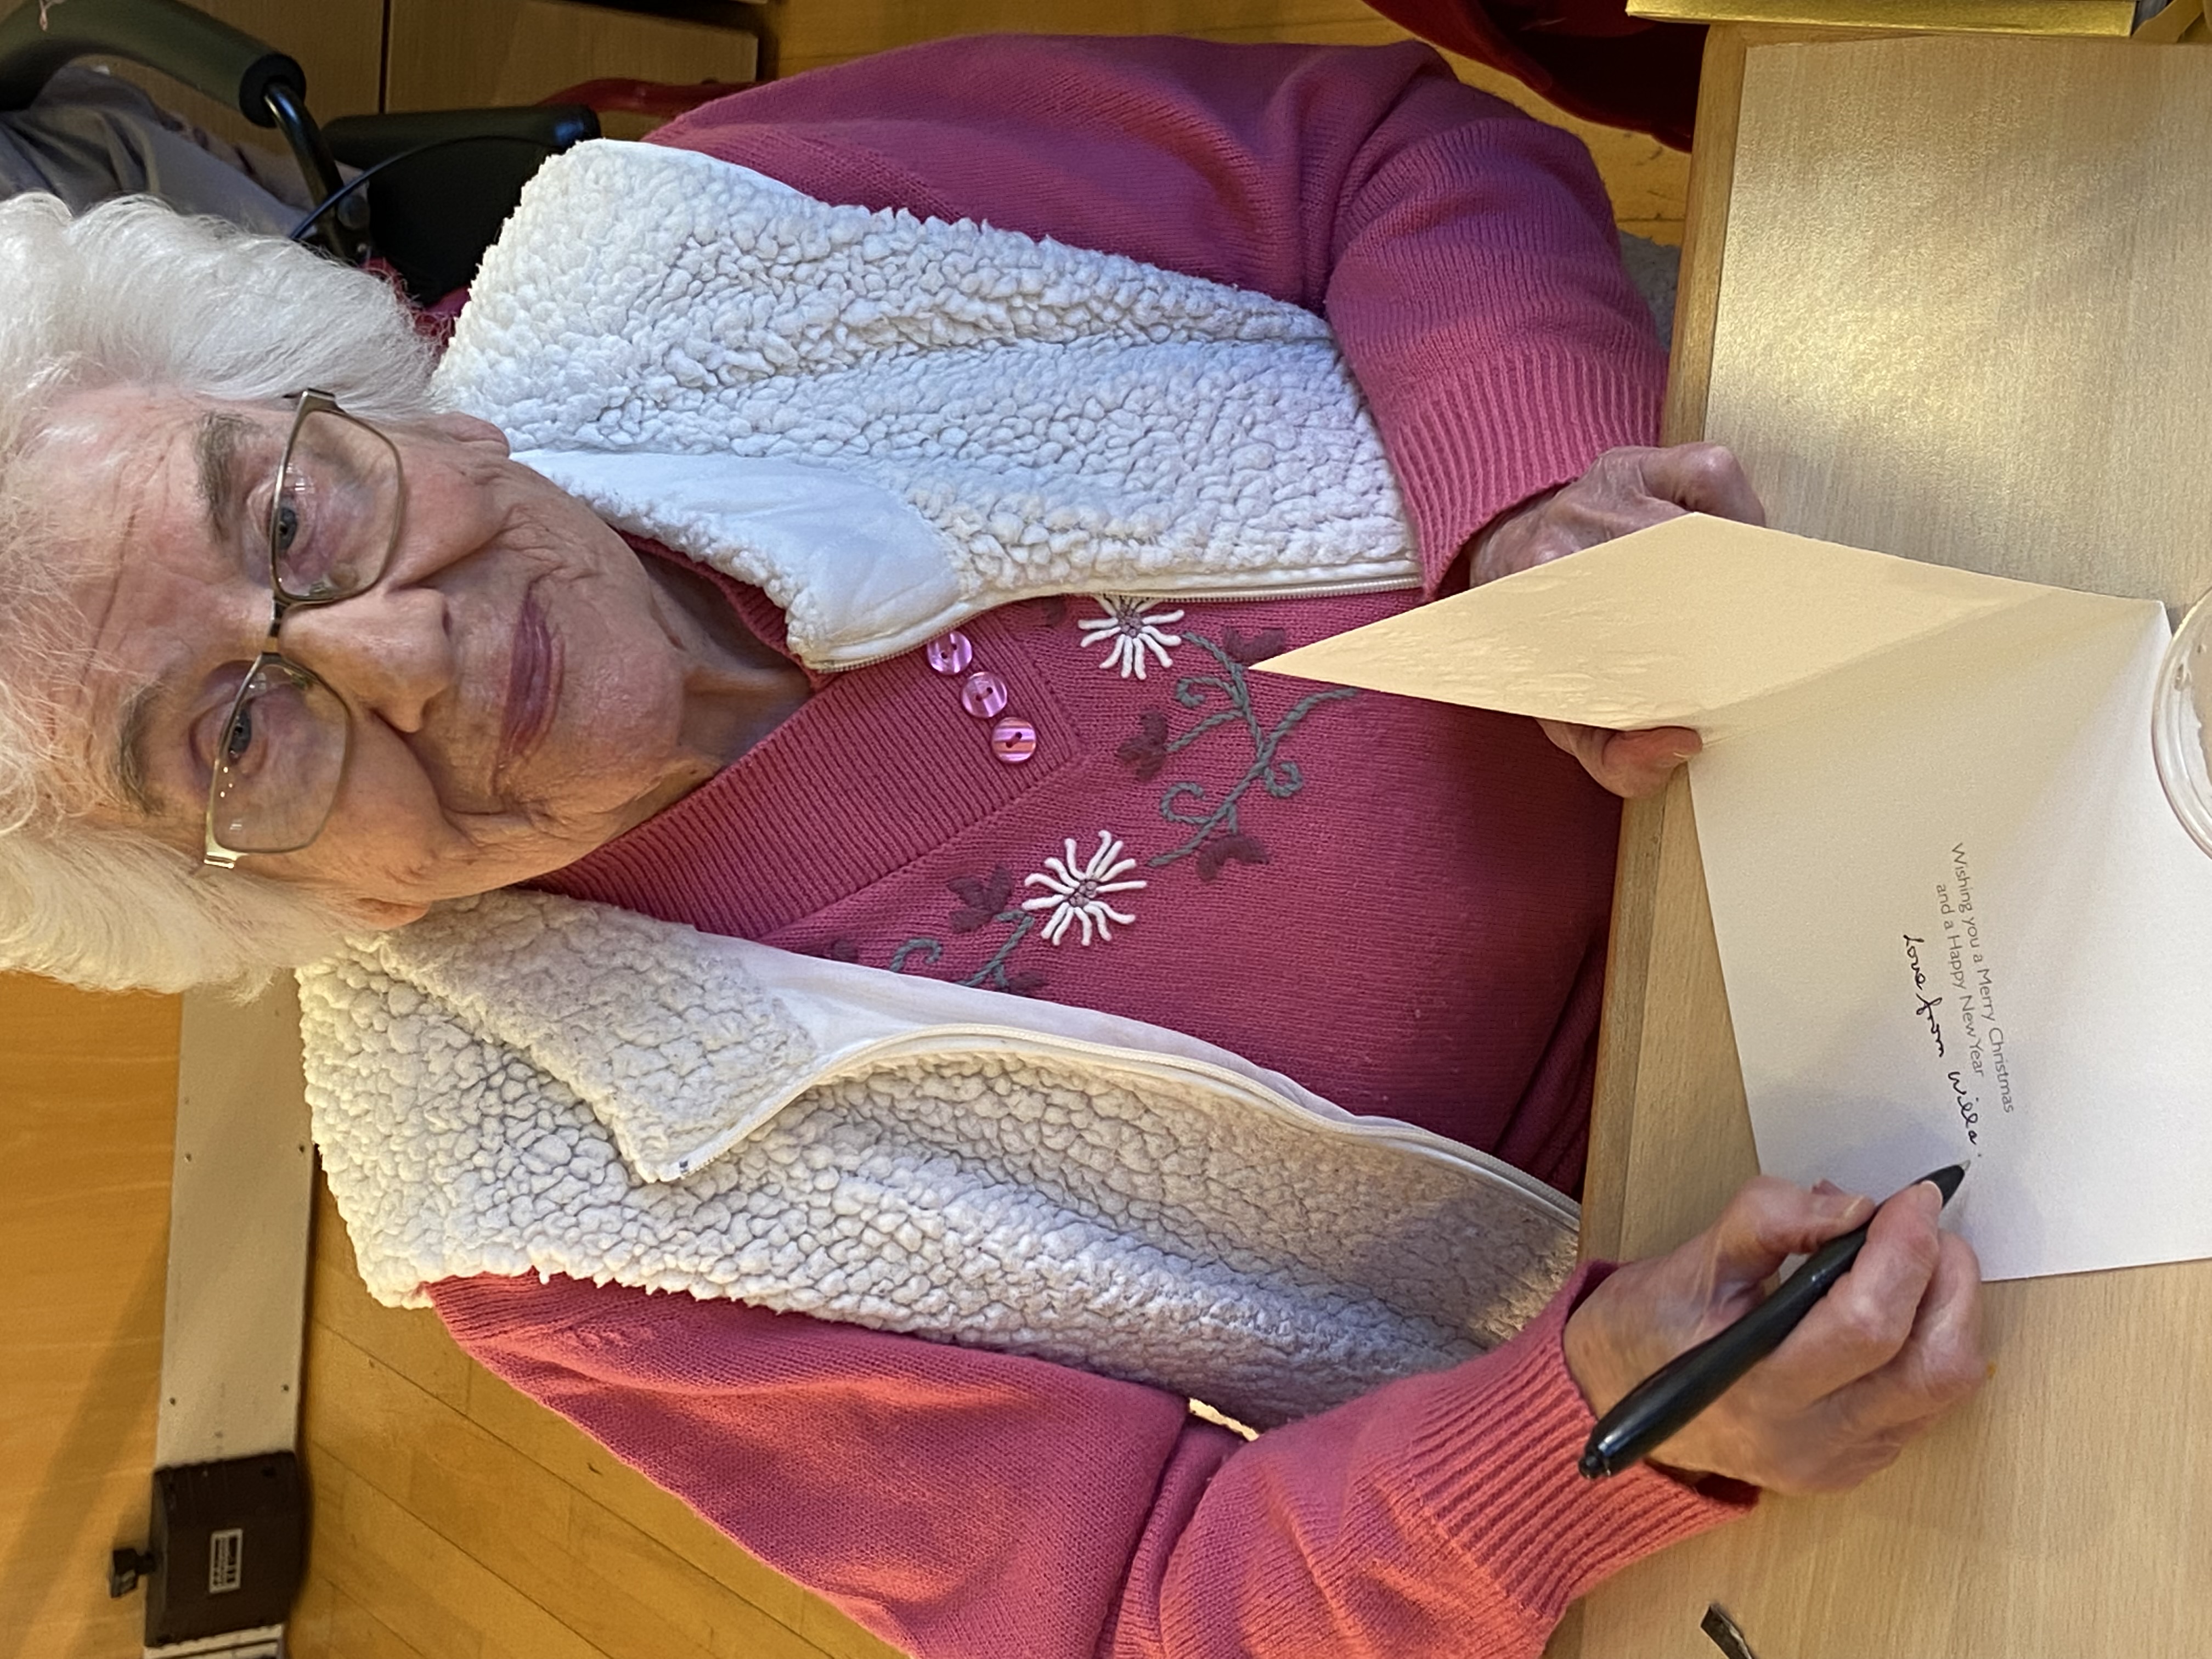 Above: A Marshall Estate who was delighted to start writing her Christmas cards.